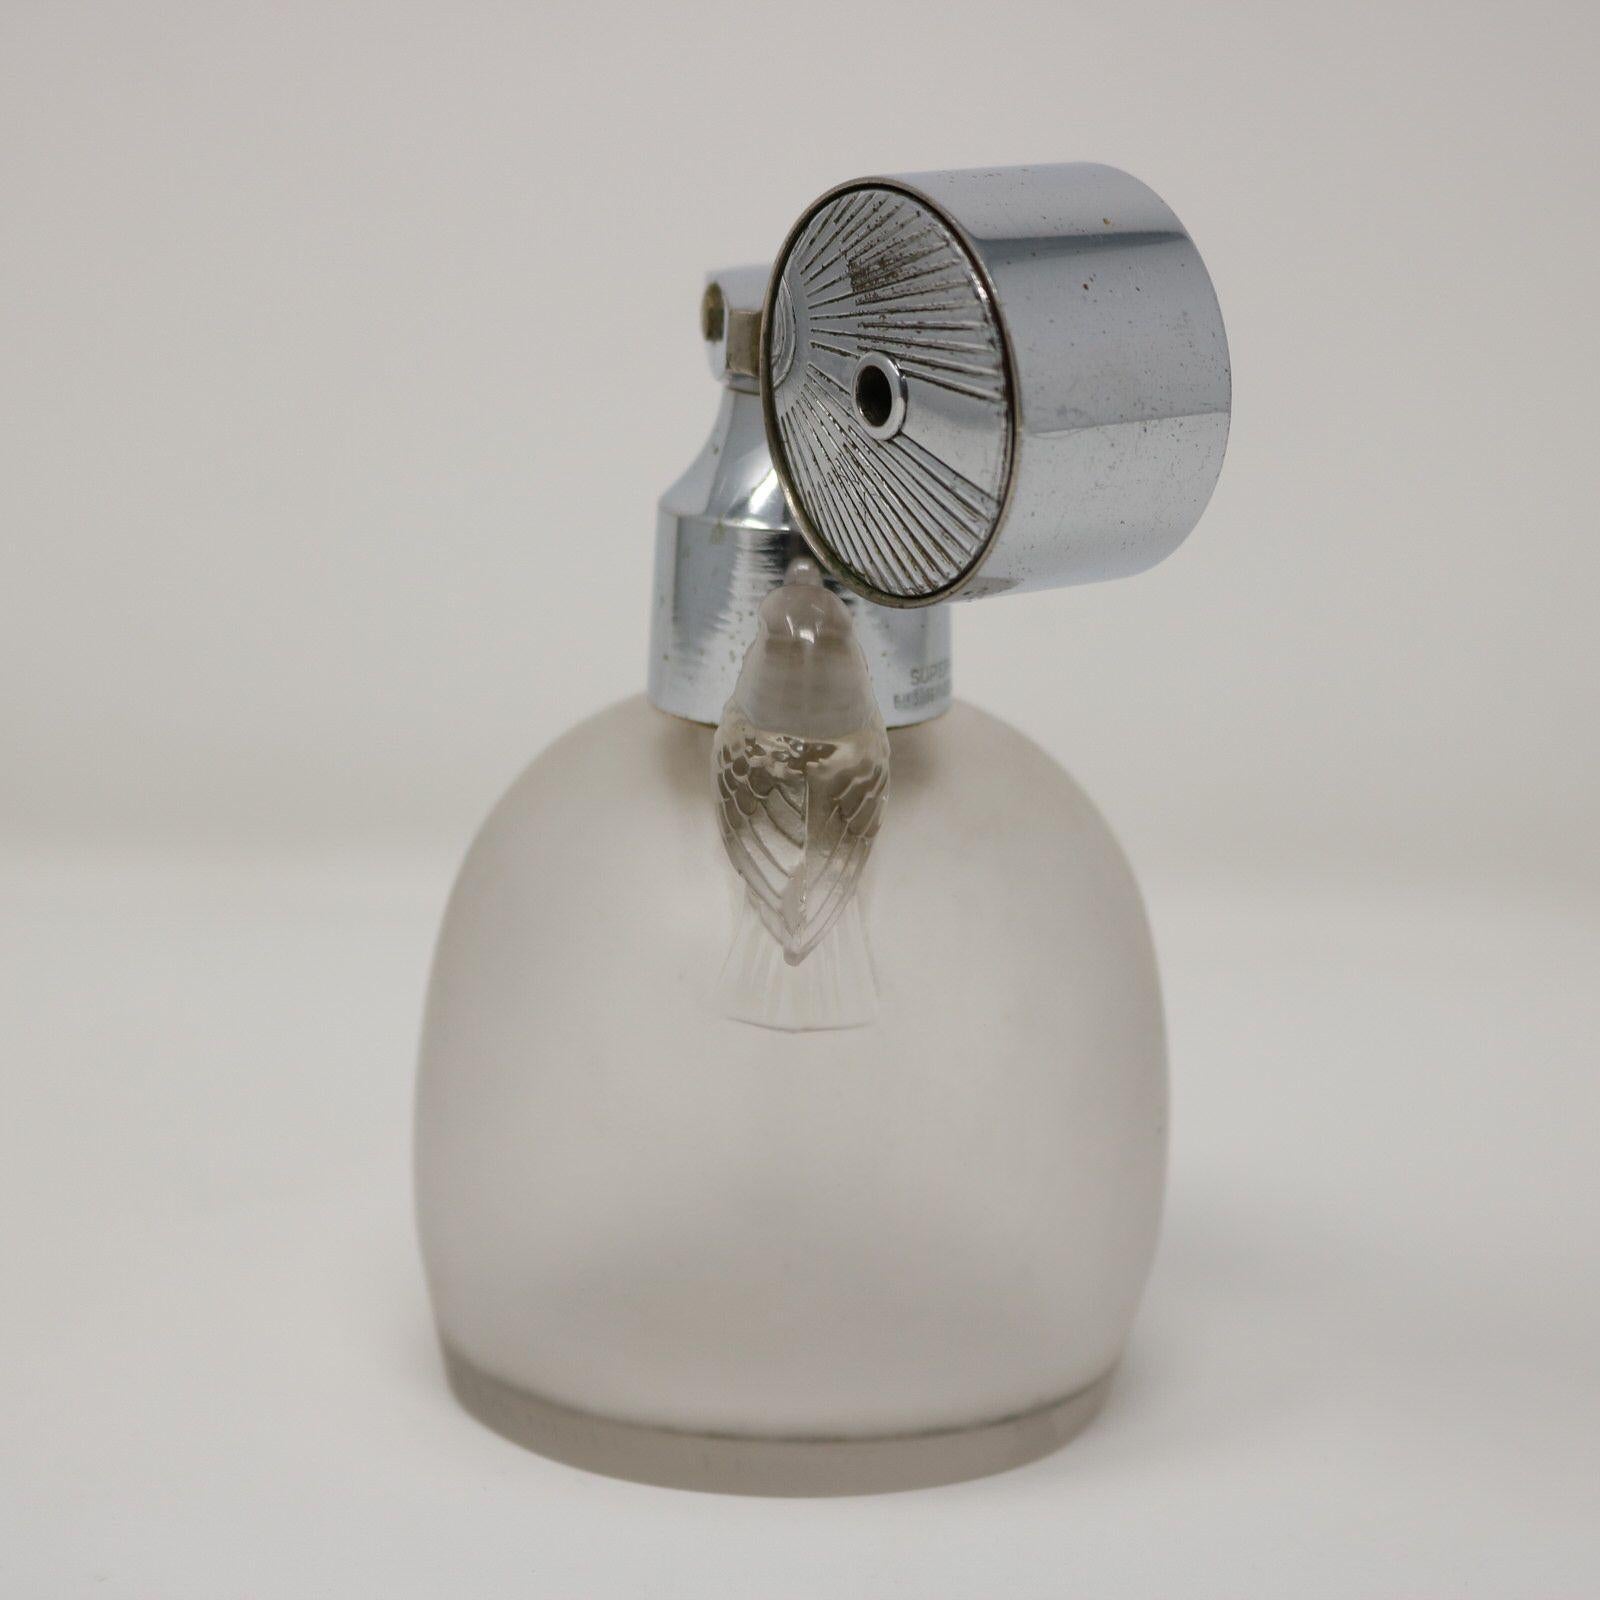 Rene Lalique Frosted Glass 'Marcel Frank Perruches' perfume bottle with atomiser. This pattern features two birds, sitting either side of the bottle neck. Wheel cut makers mark, 'R LALIQUE FRANCE', around base. Book reference: Marcilhac MARCEL FRANK